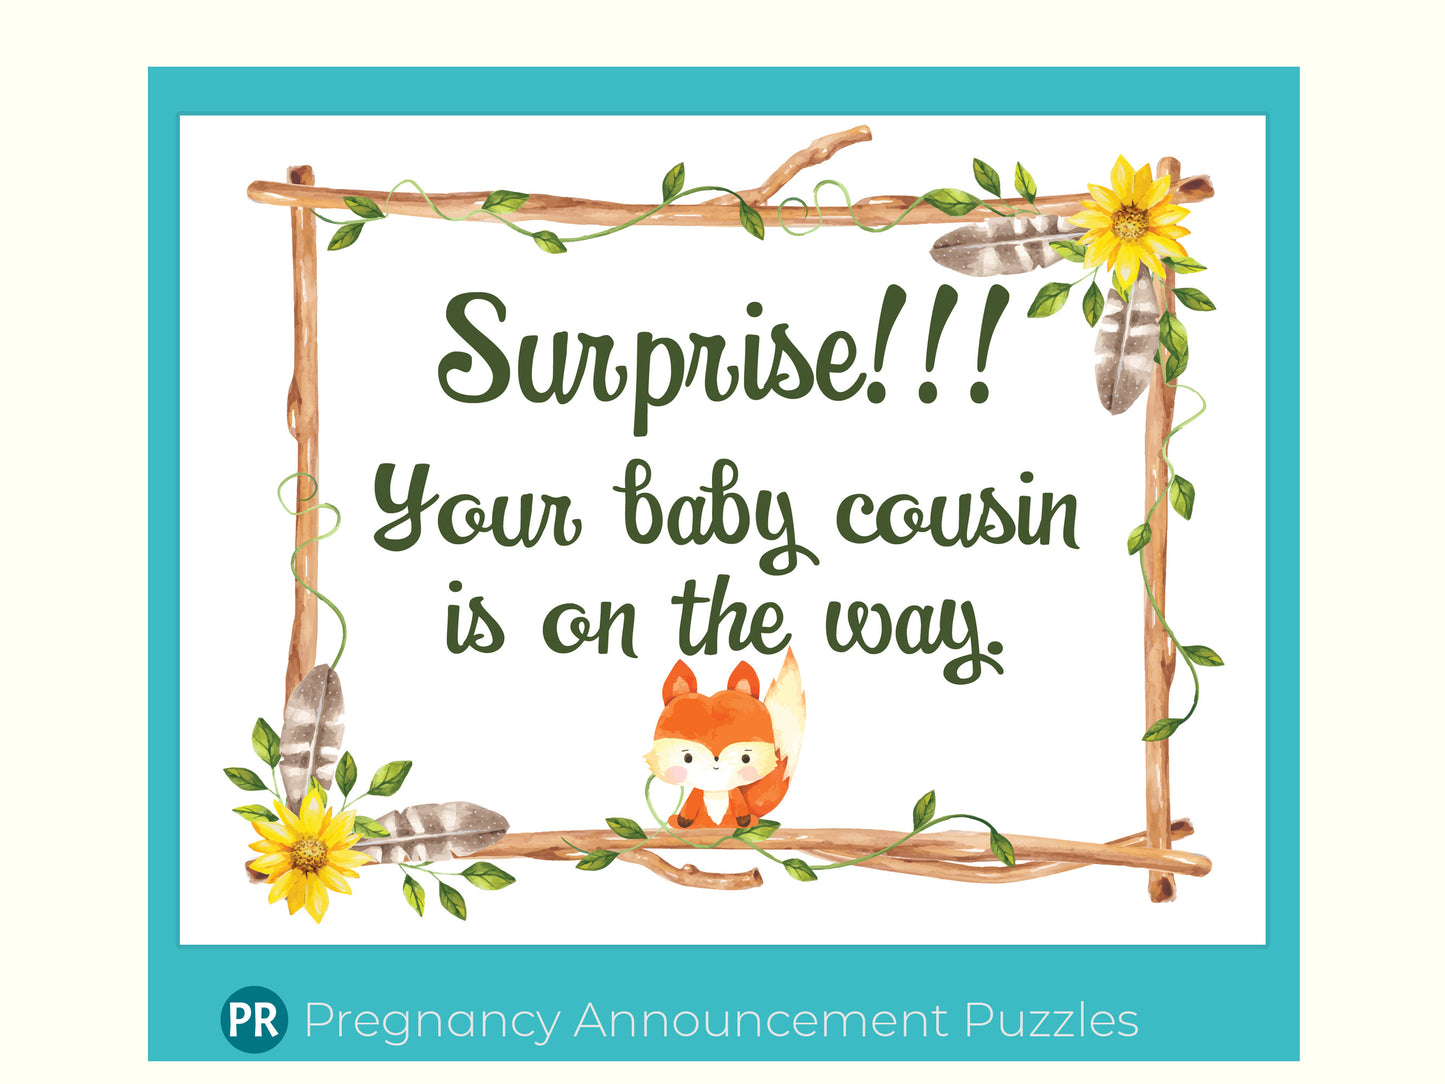 Sweet Baby Fox Pregnancy Puzzle - Add Your Message, Special Pregnancy Announcement, Tailored Expecting Gift